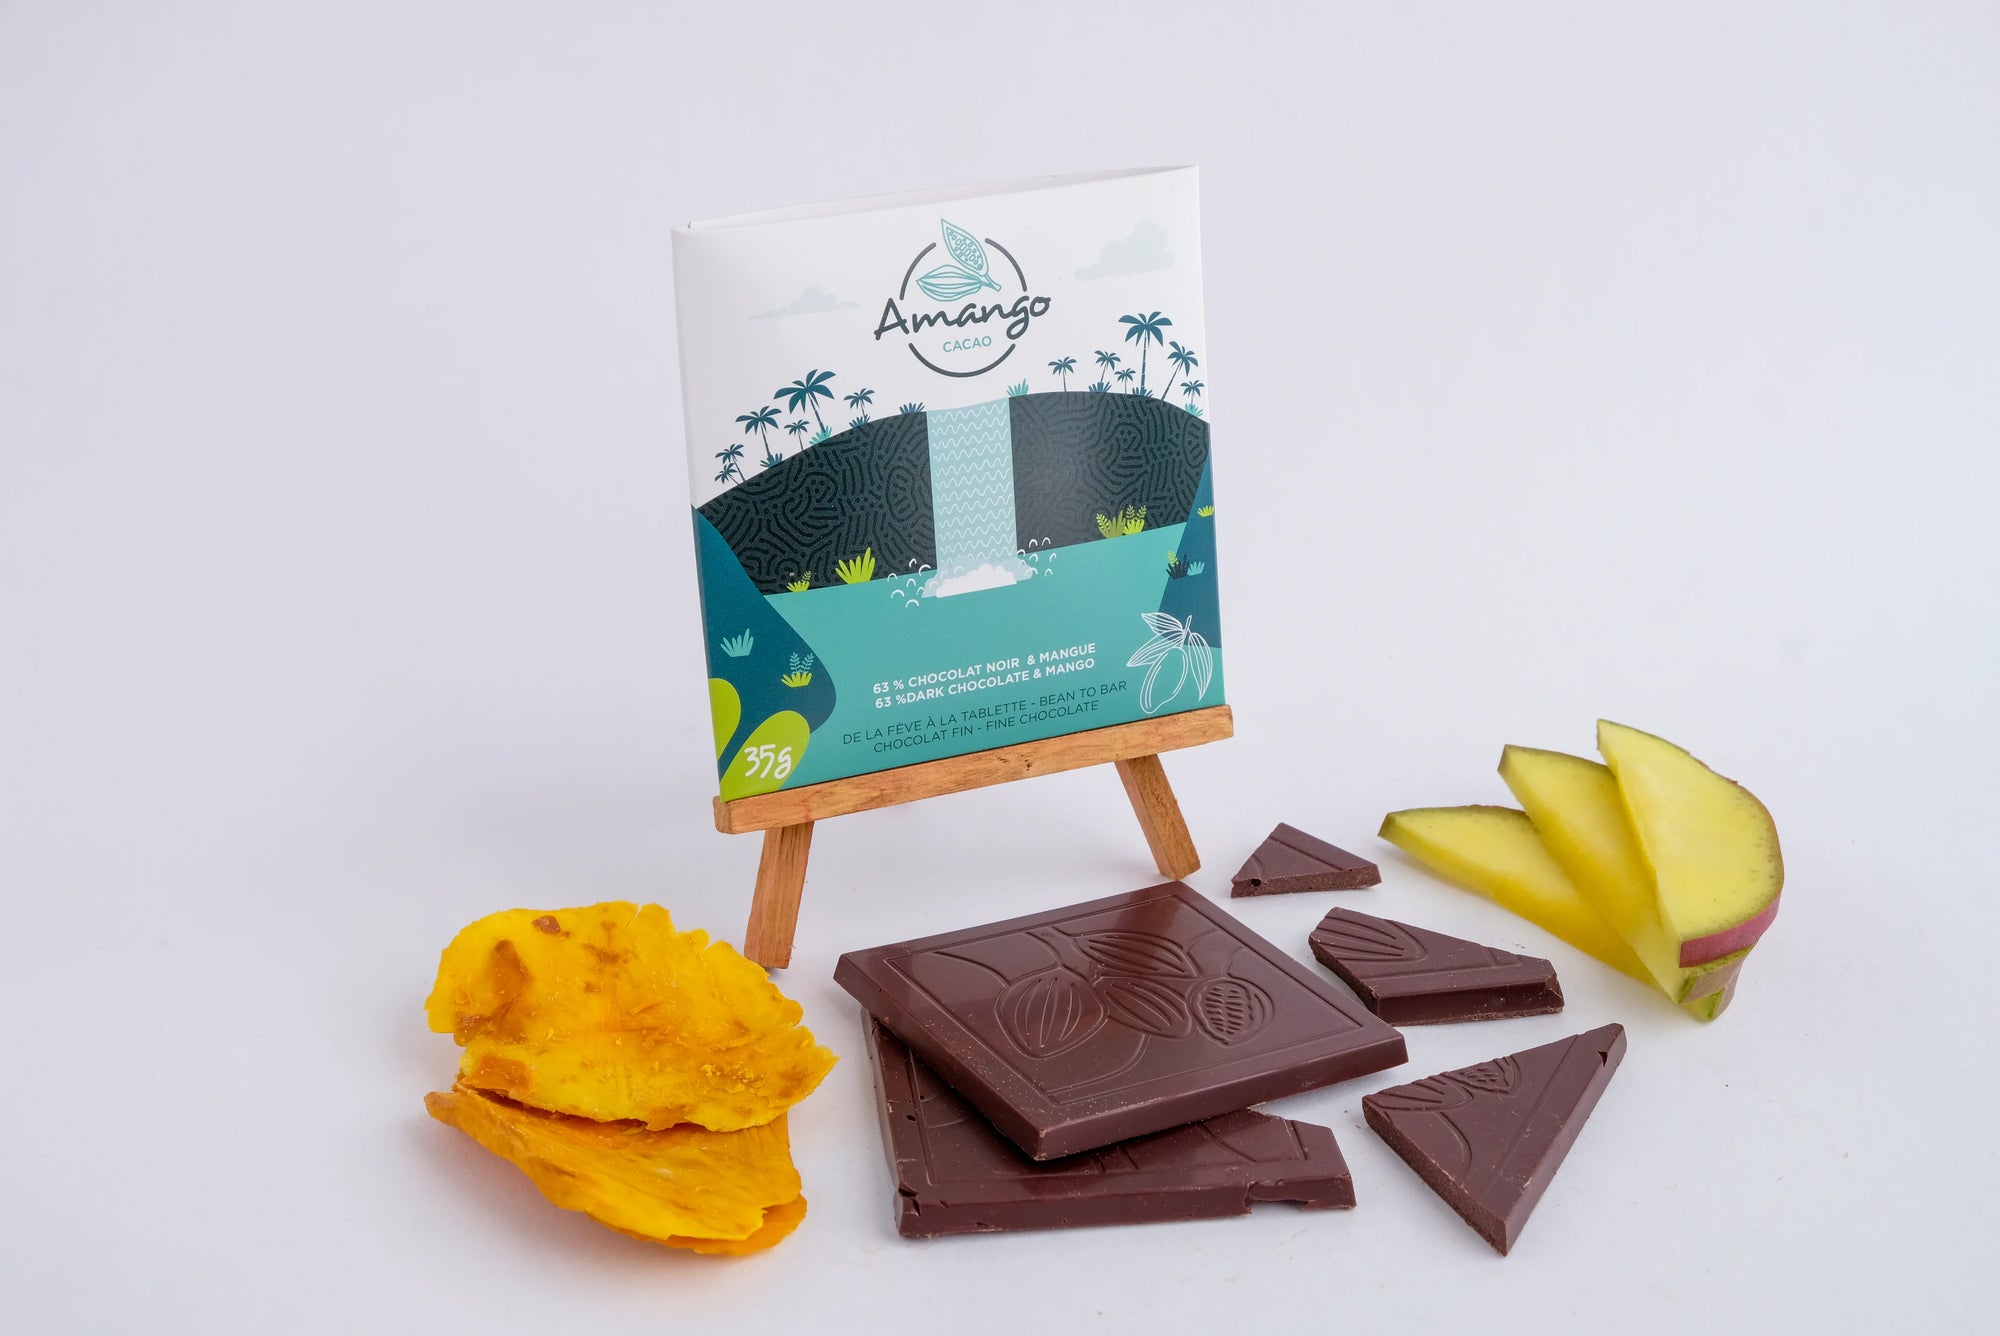 Mango and 63% Dark Chocolate with Cocoa by Amango, 35g